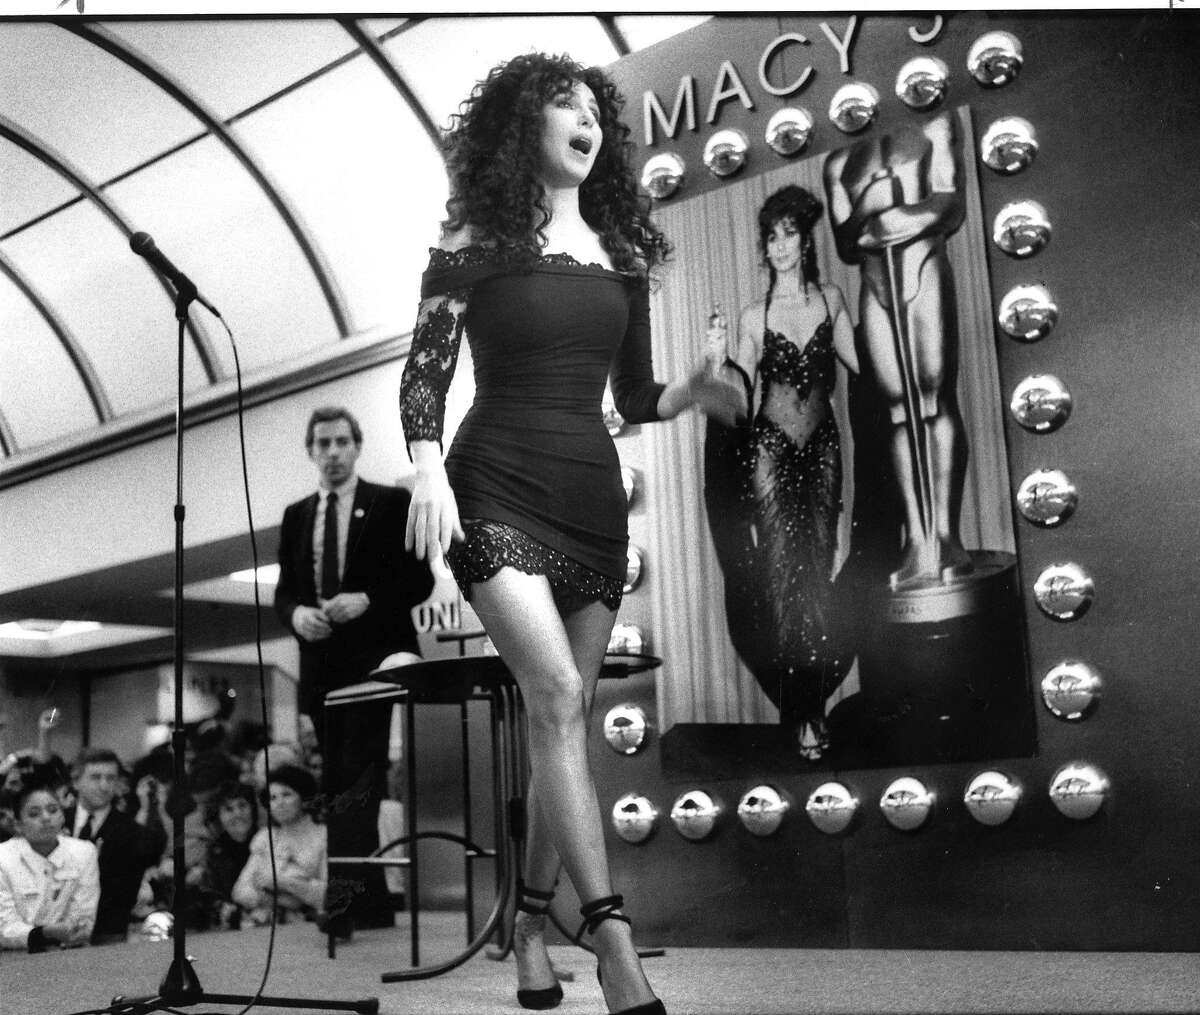 Singer Cher, puts in an appearance at Macy's drawing a huge crowd. November 15, 1988 Photo ran 11/16/1988, P. B5 (batch 1)